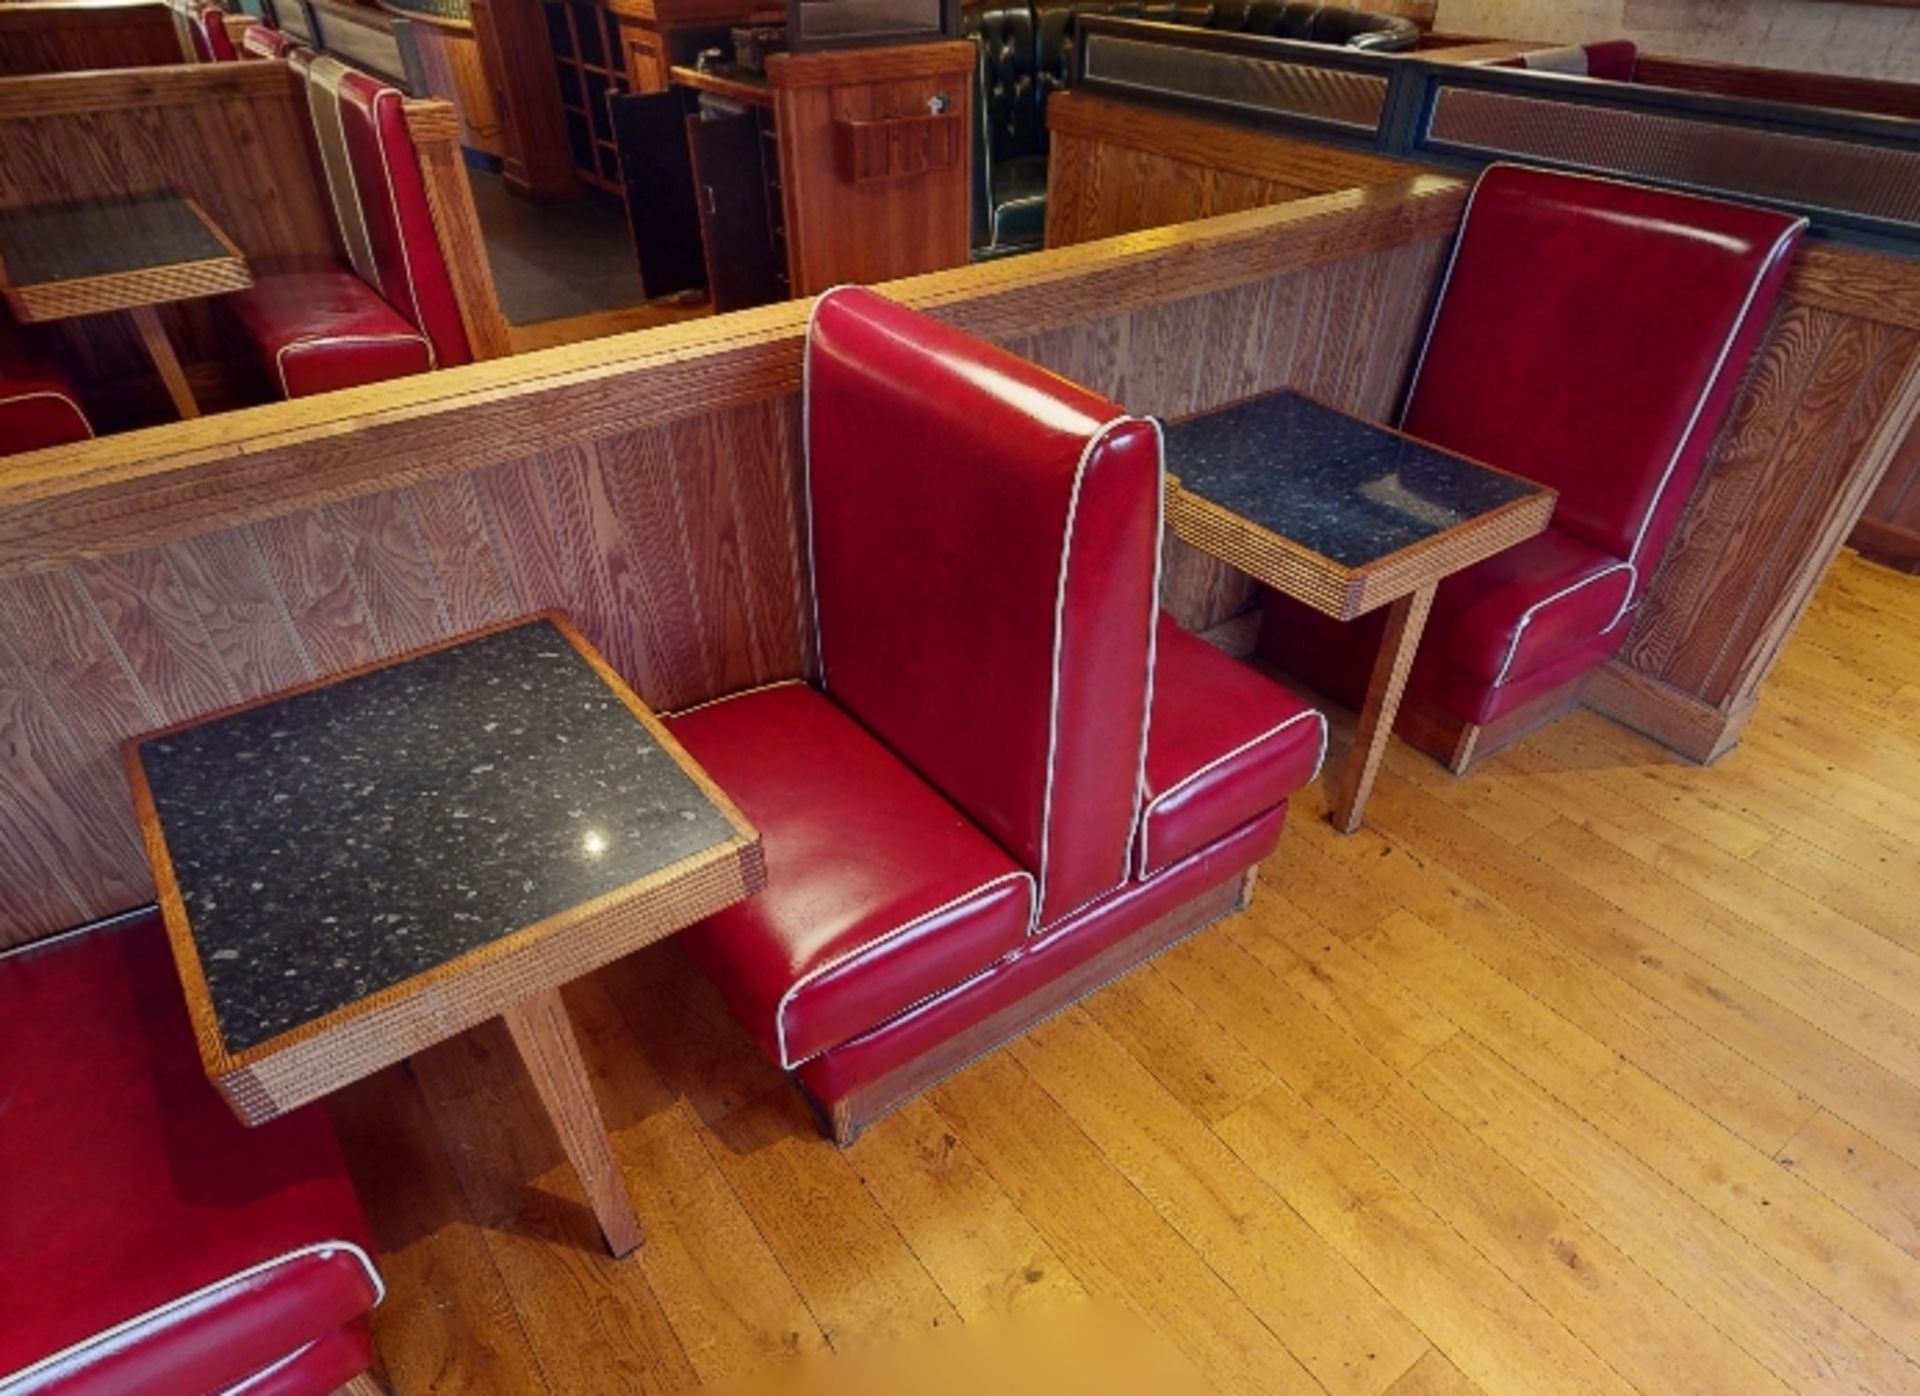 Selection of Single Seating Benches and Dining Tables to Seat Upto 10 Persons - Retro - 1950's - Image 5 of 6